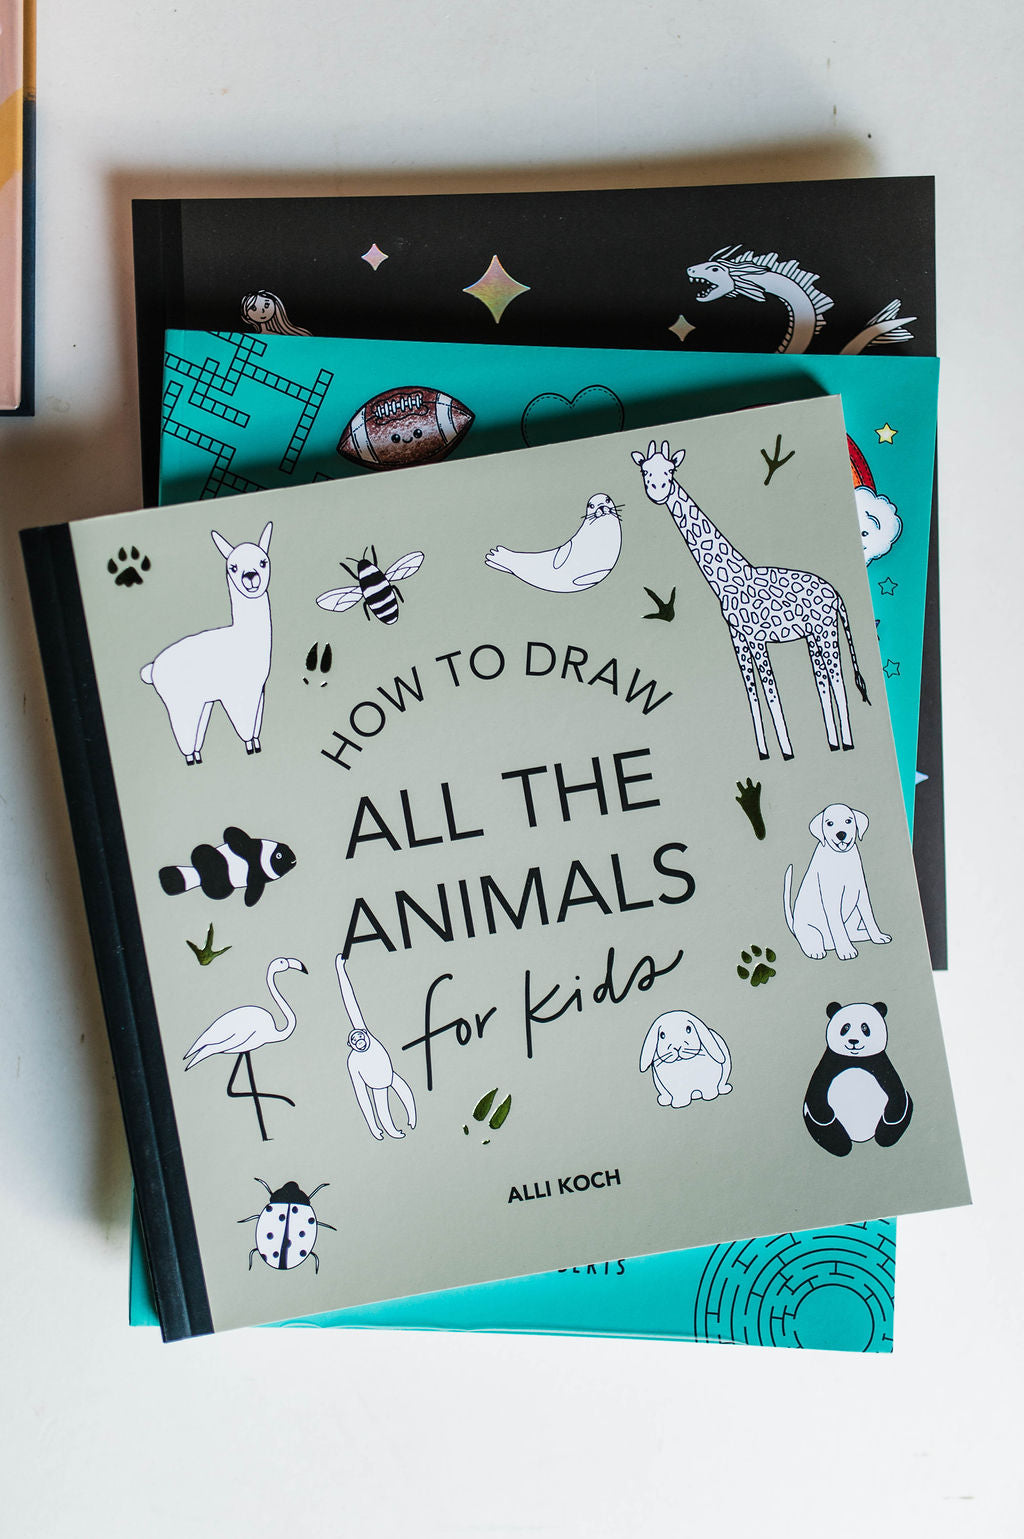 how to draw all the animals for kids by alli koch | activity book